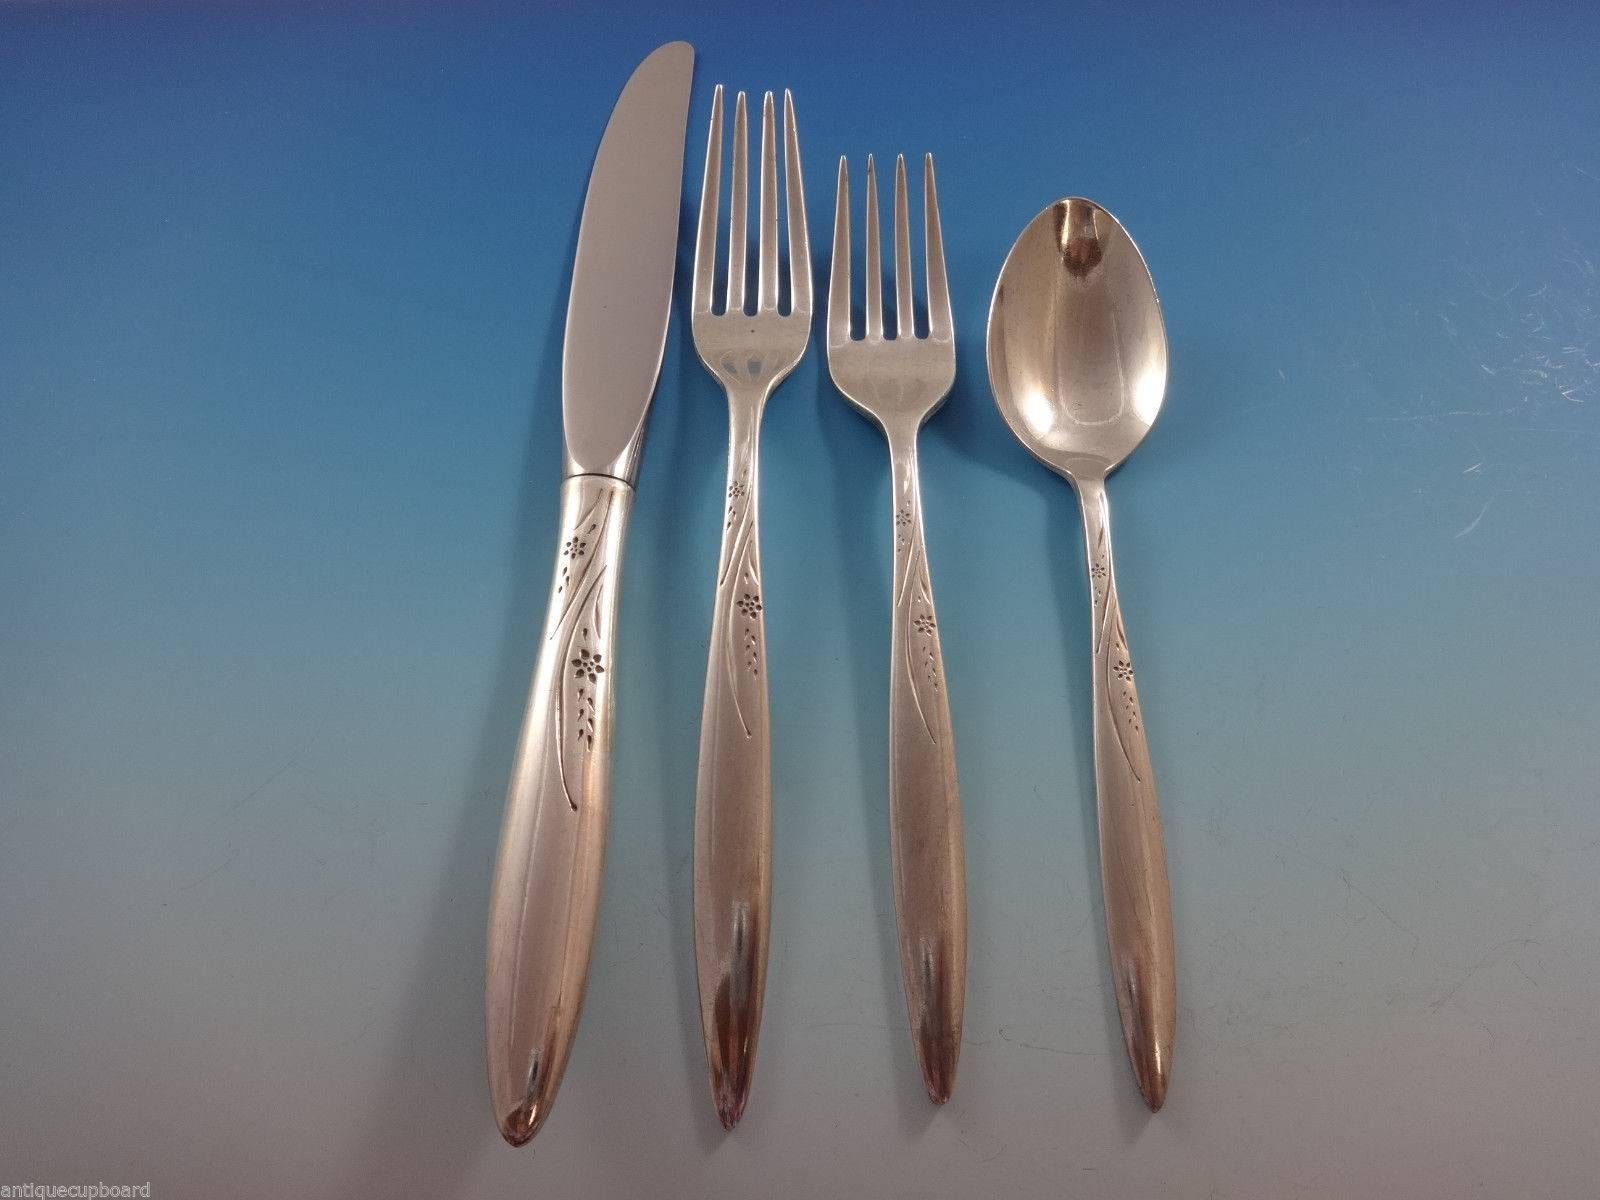 Helene by Easterling, circa 1955 sterling silver flatware set of 59 pieces. This set includes:

12 knives, 9